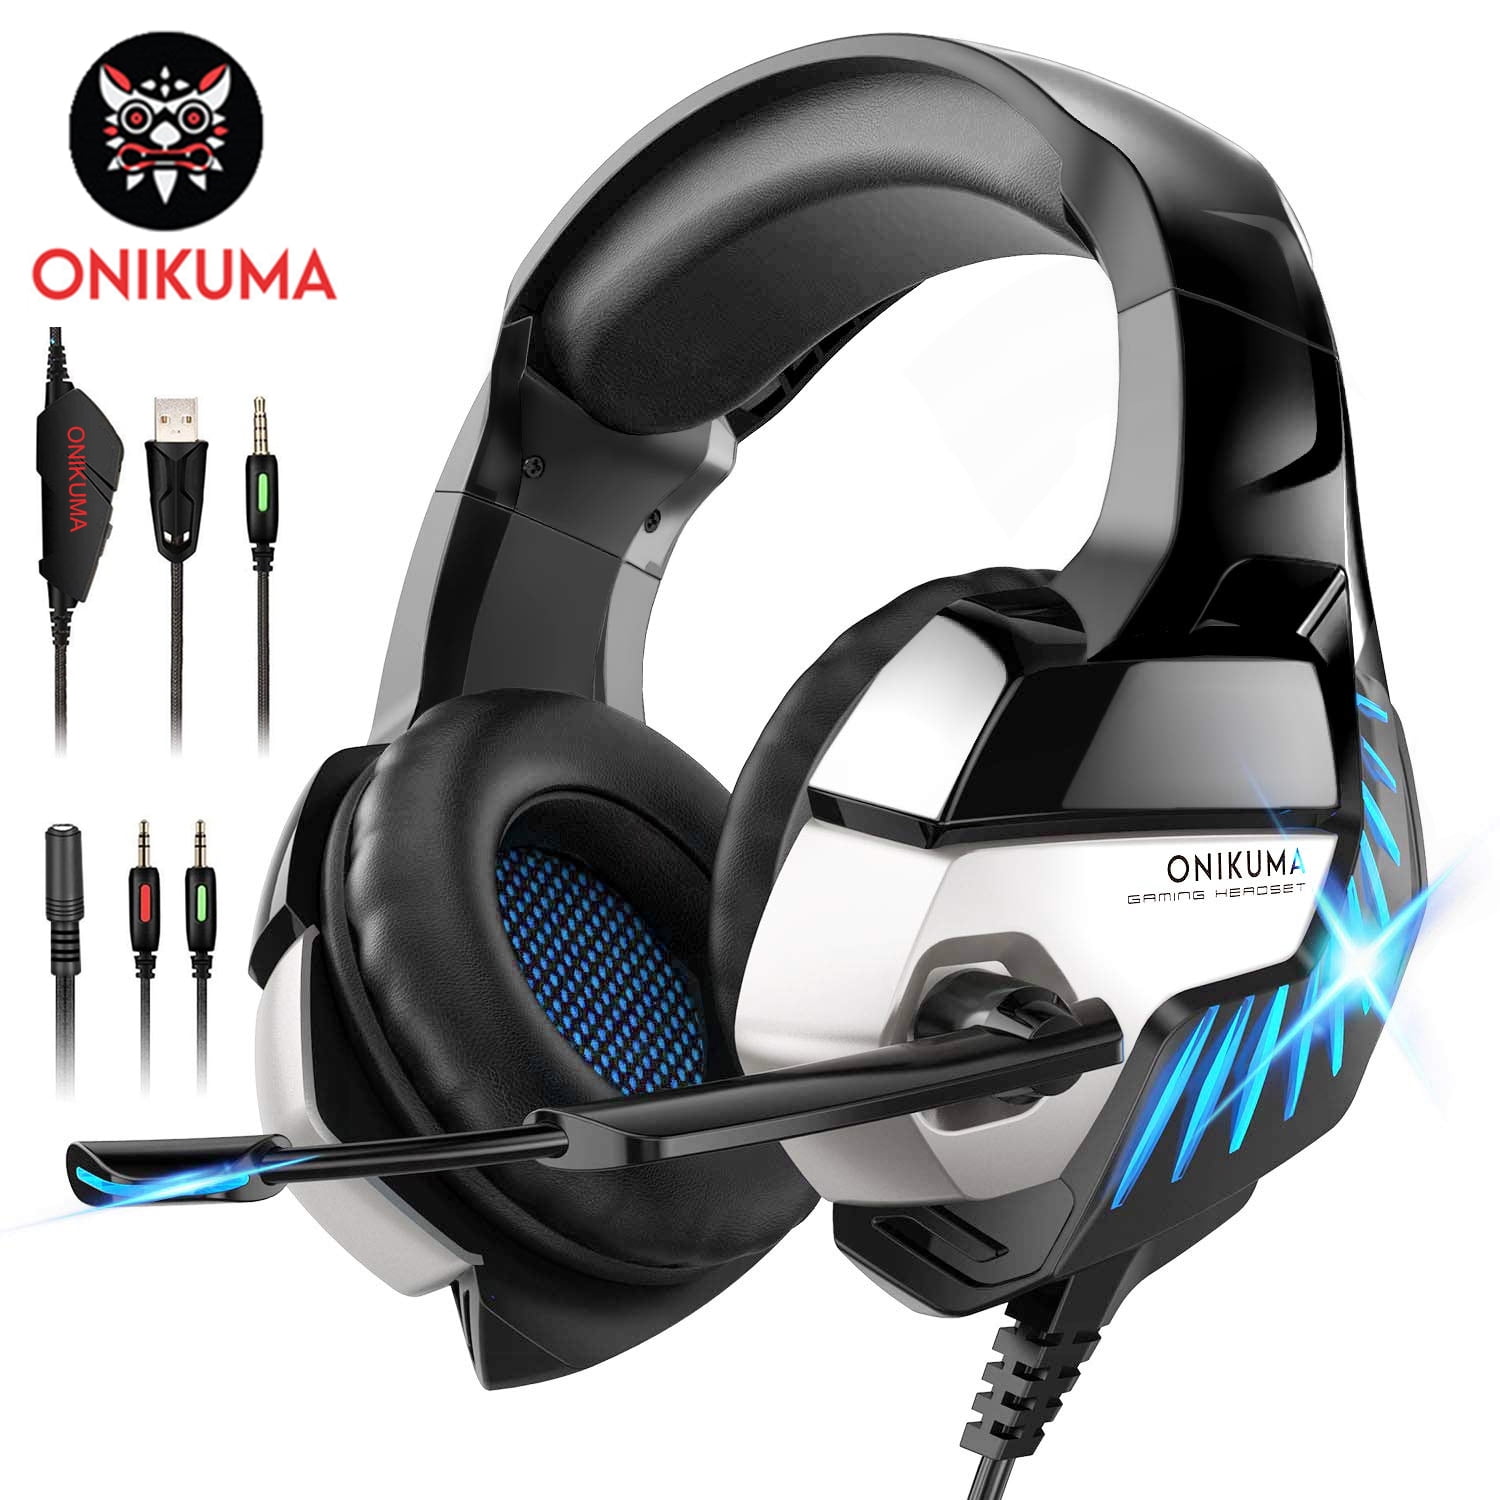 maksimum Duplikere teenager ONIKUMA Gaming Headset, 7.1 Surround Sound Stereo Pc Gaming Headphones, Gaming  Headsets with Noise Canceling Mic & LED Light Headsets Compatible with PC,  PS4,PS5, Xbox One Controller, Nintendo Switch - Walmart.com